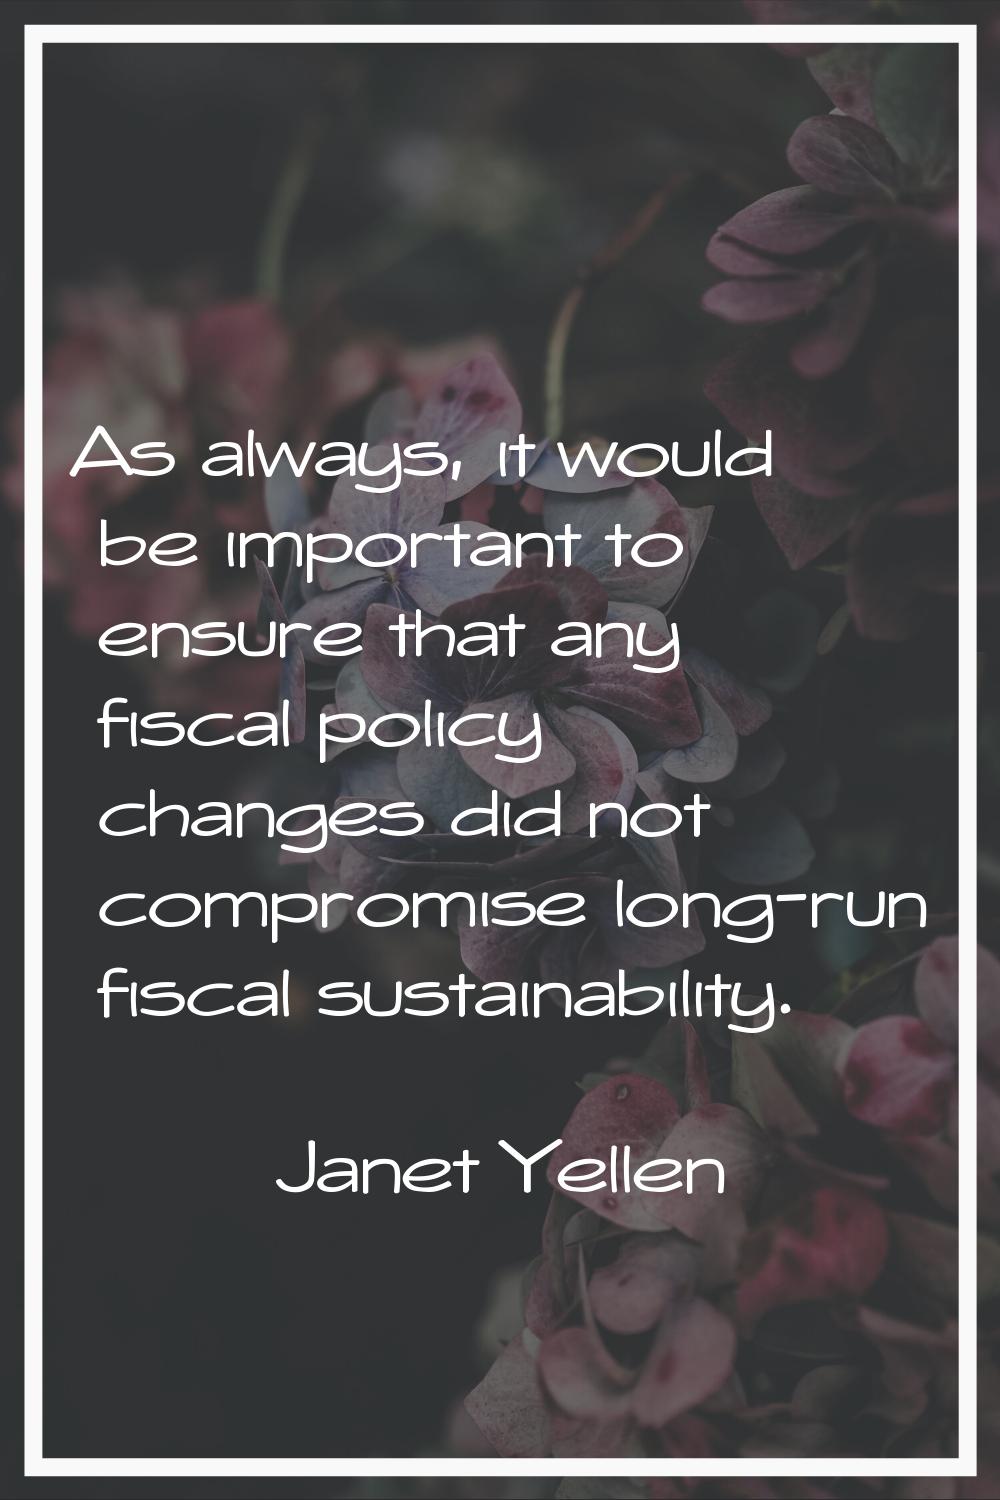 As always, it would be important to ensure that any fiscal policy changes did not compromise long-r